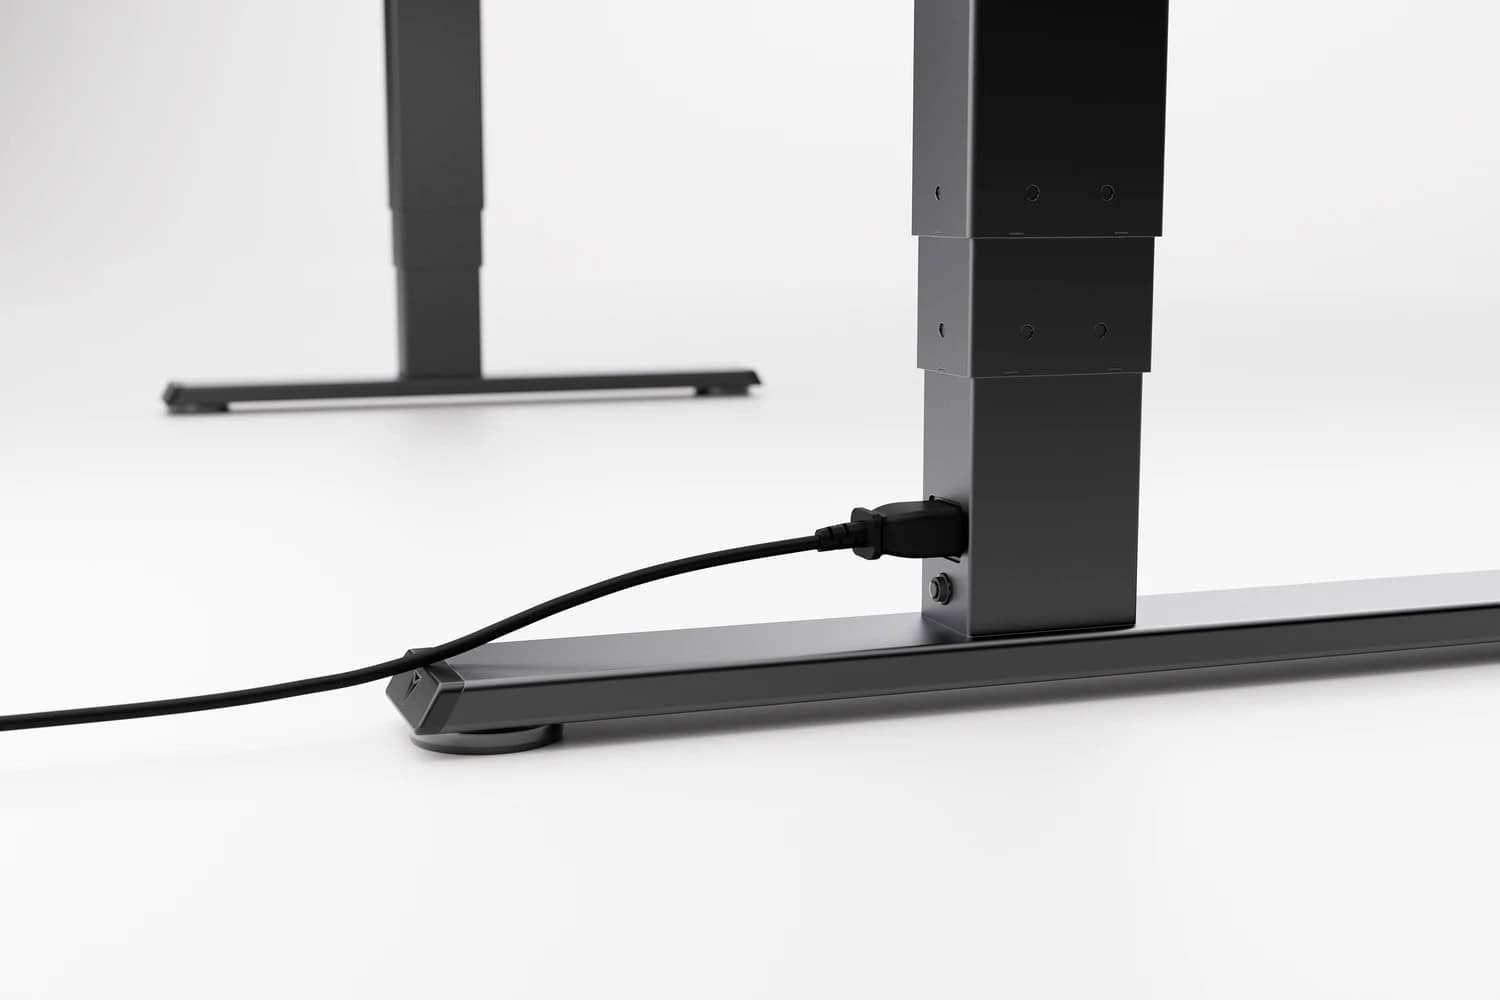 A power cord neatly running through a cable management clip attached to the leg of a Secretlab Magnus Pro desk.